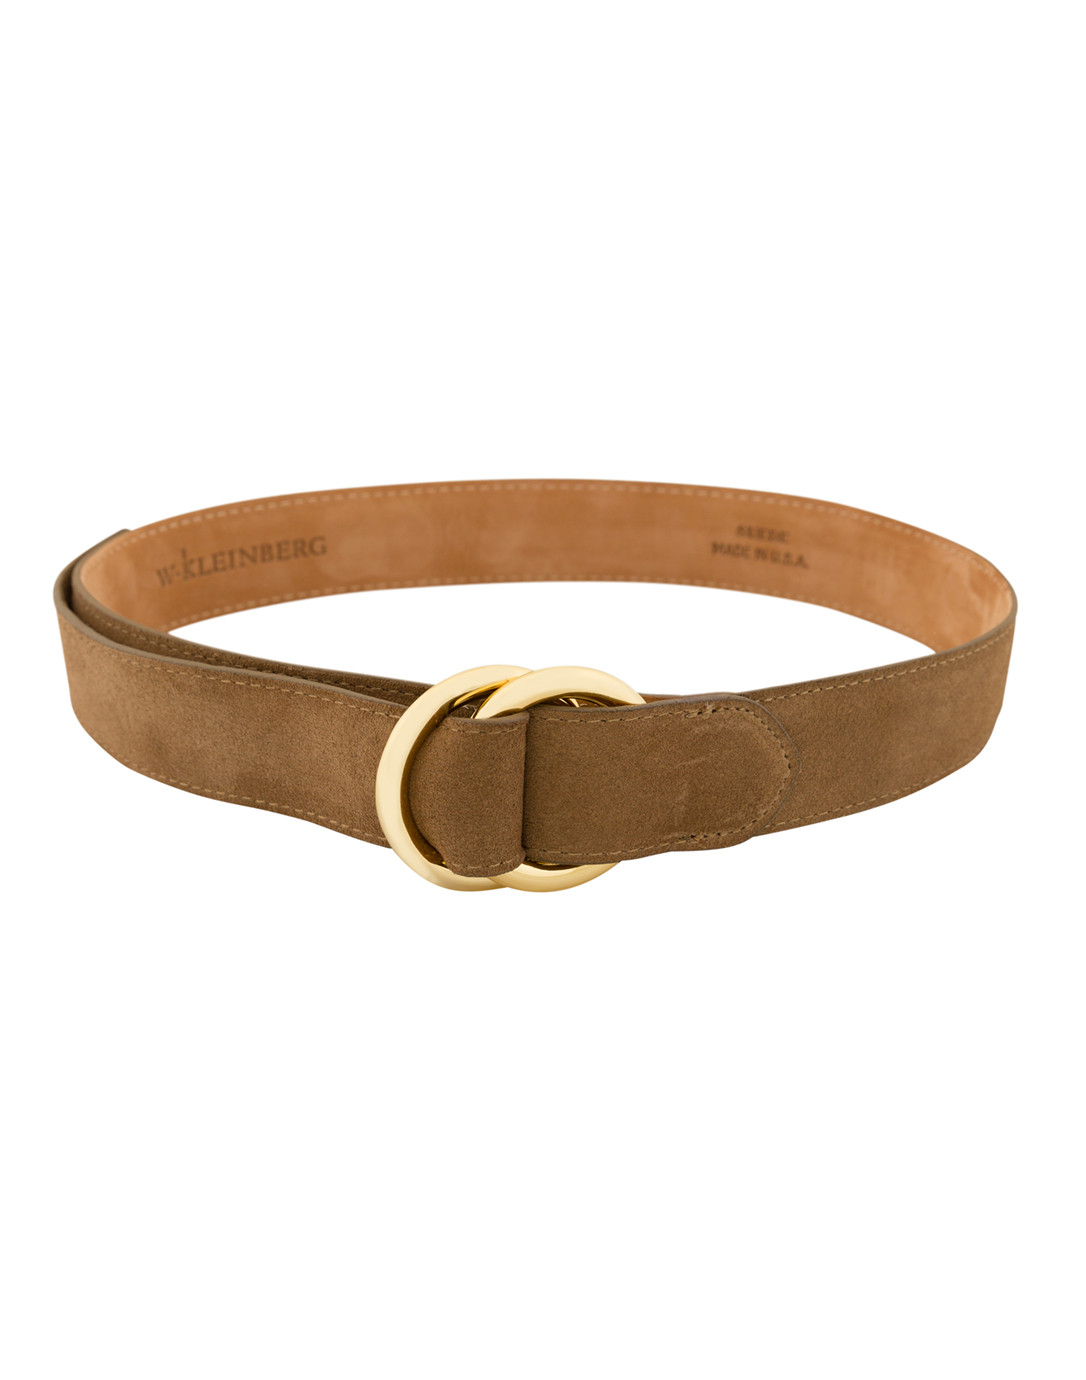 Cocoa Suede Belt with Double Gold Rings | W. Kleinberg